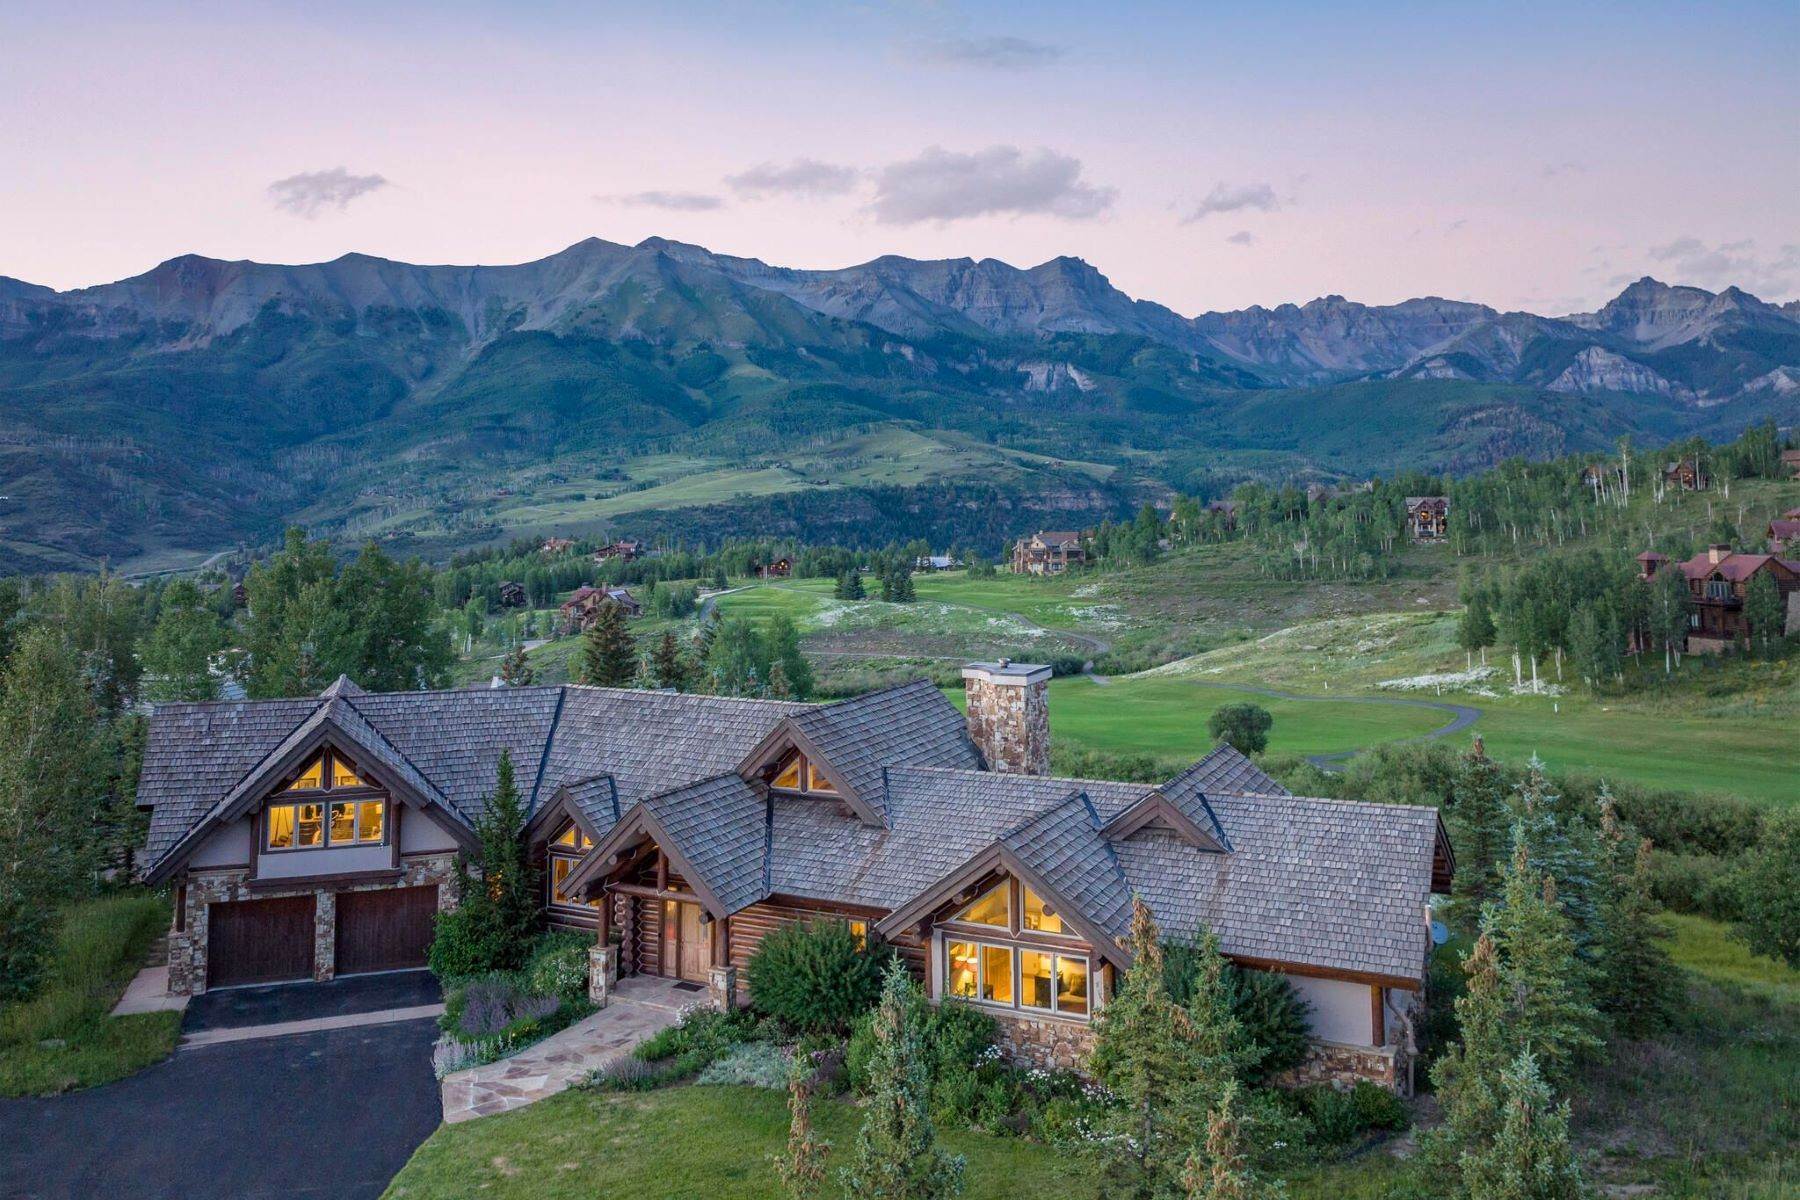 Other Residential Homes for Active at 132 Adams Ranch Road, Mountain Village, CO, 81435 132 Adams Ranch Road Mountain Village, Colorado 81435 United States